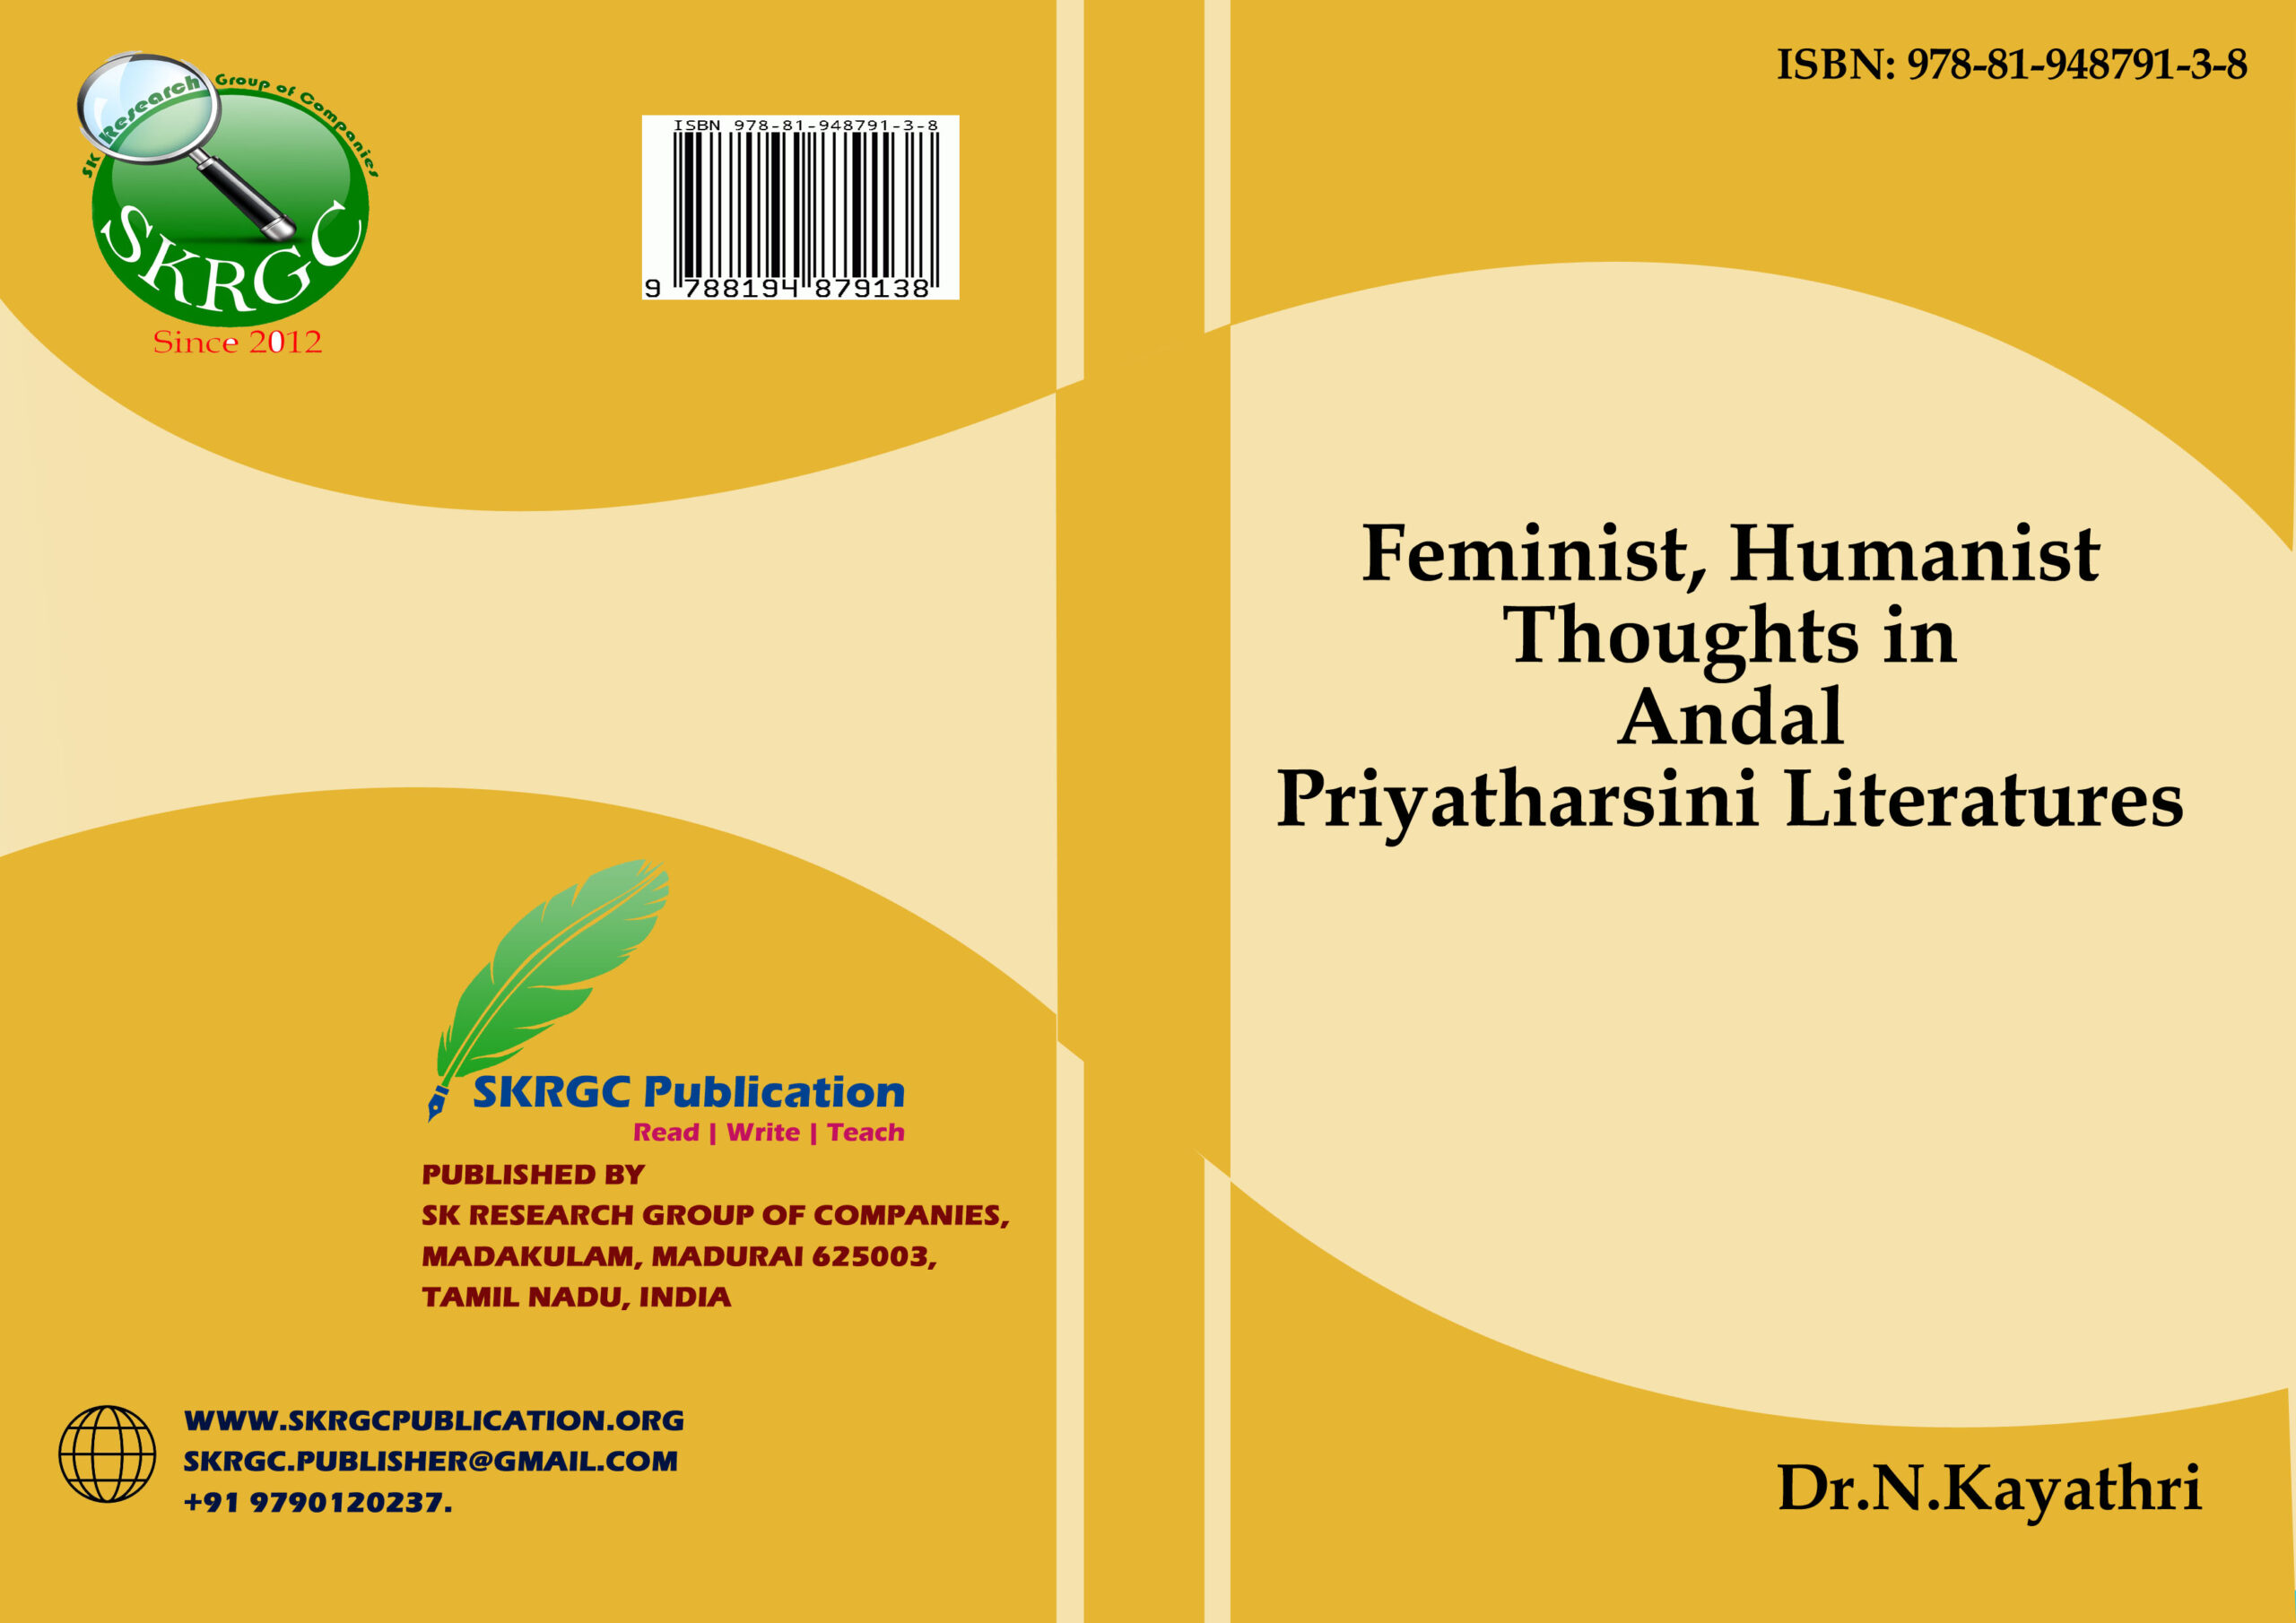 Feminist, Humanist Thoughts in Andal Priyatharsini Literatures